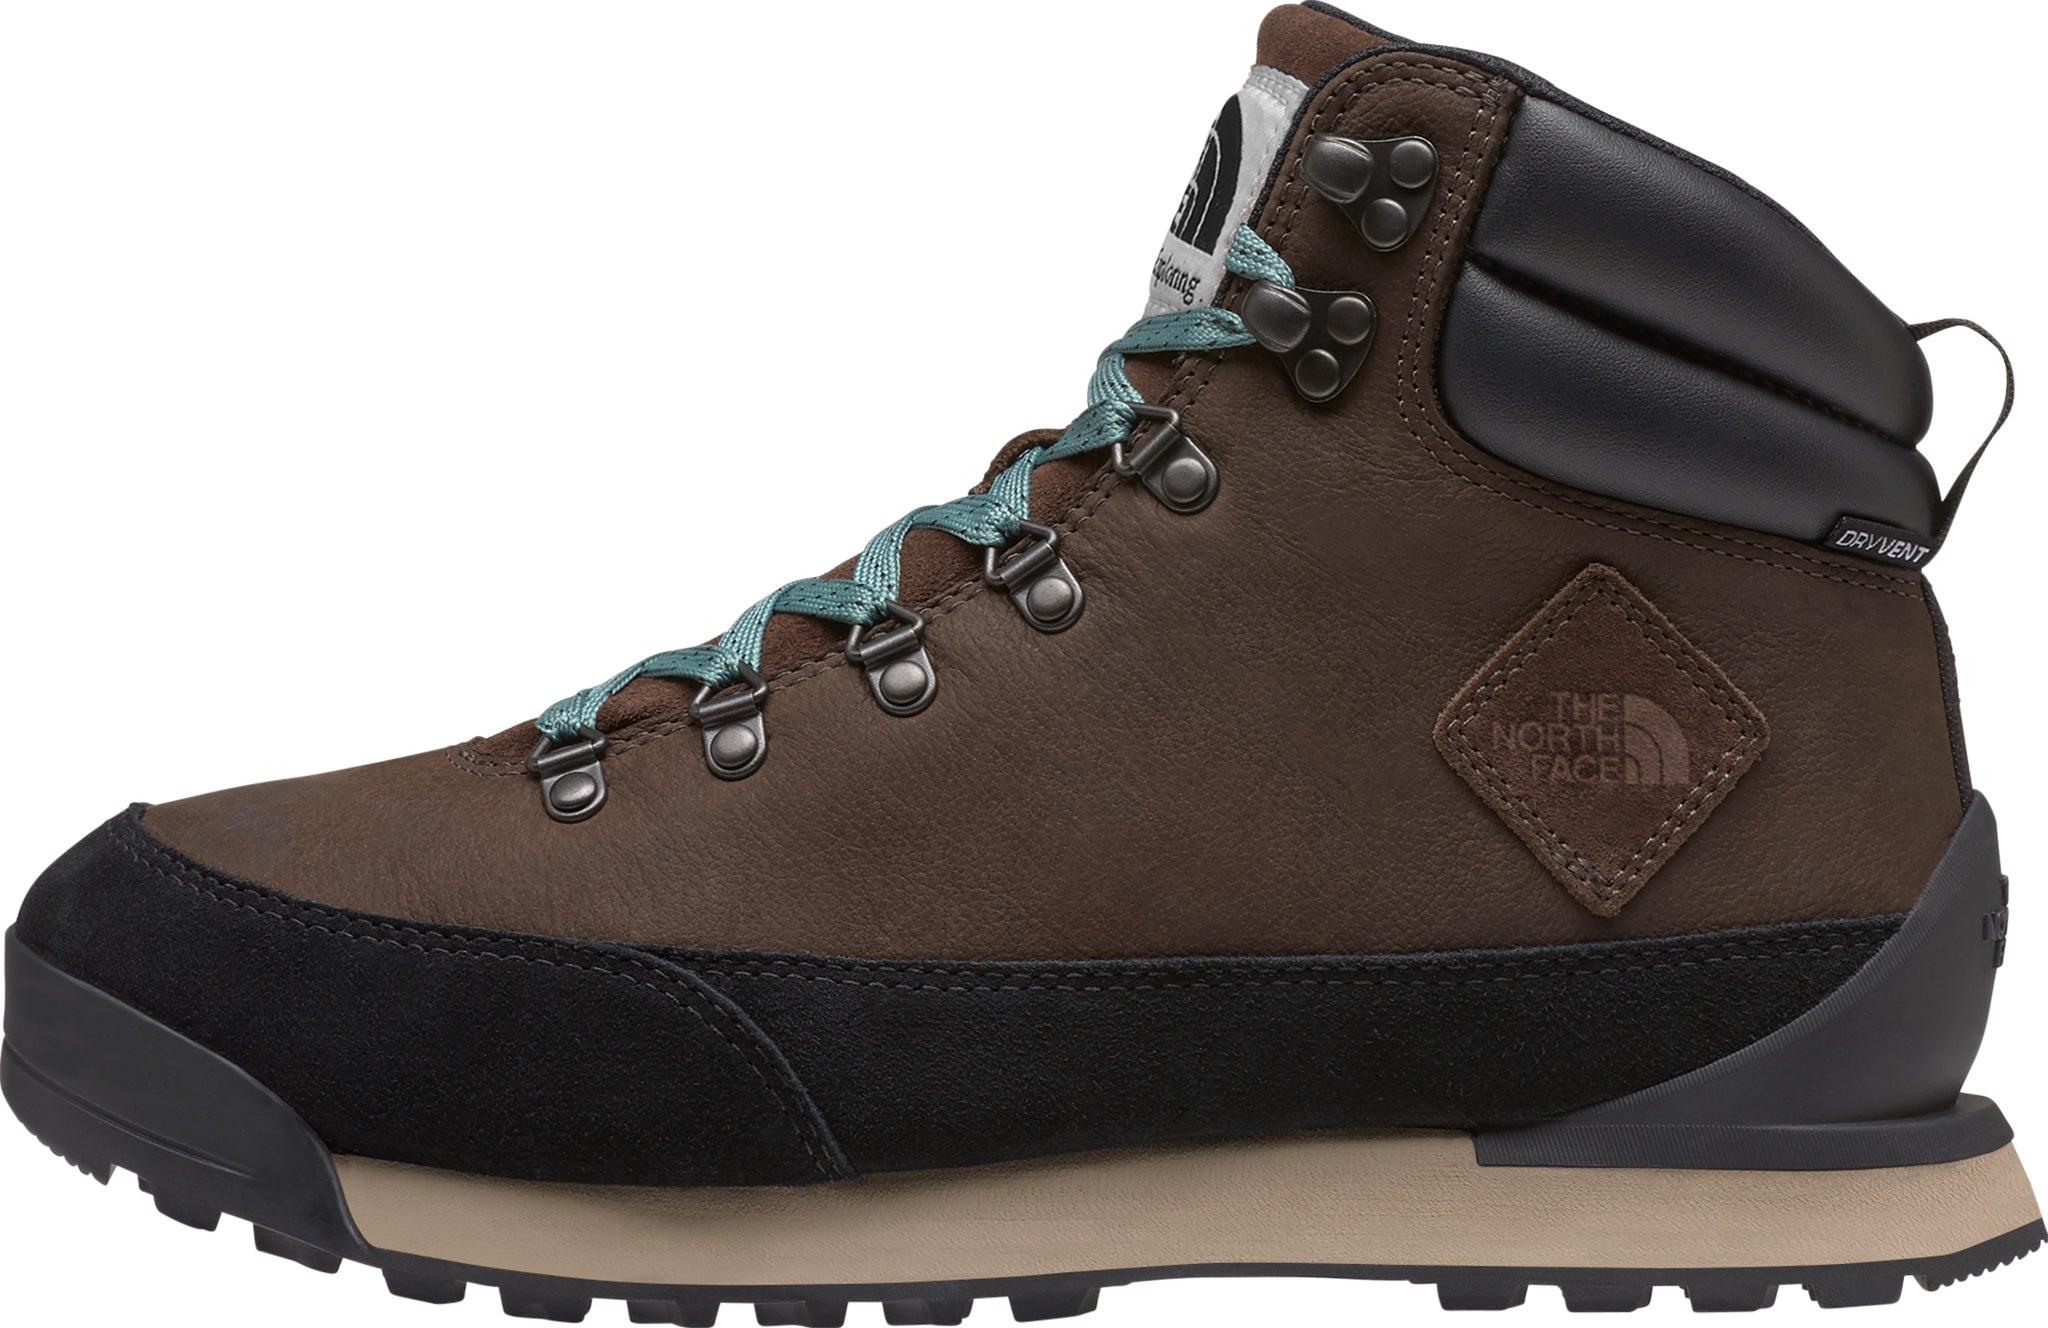 The North Face Back-To-Berkeley IV Leather Waterproof Boots - Men’s ...